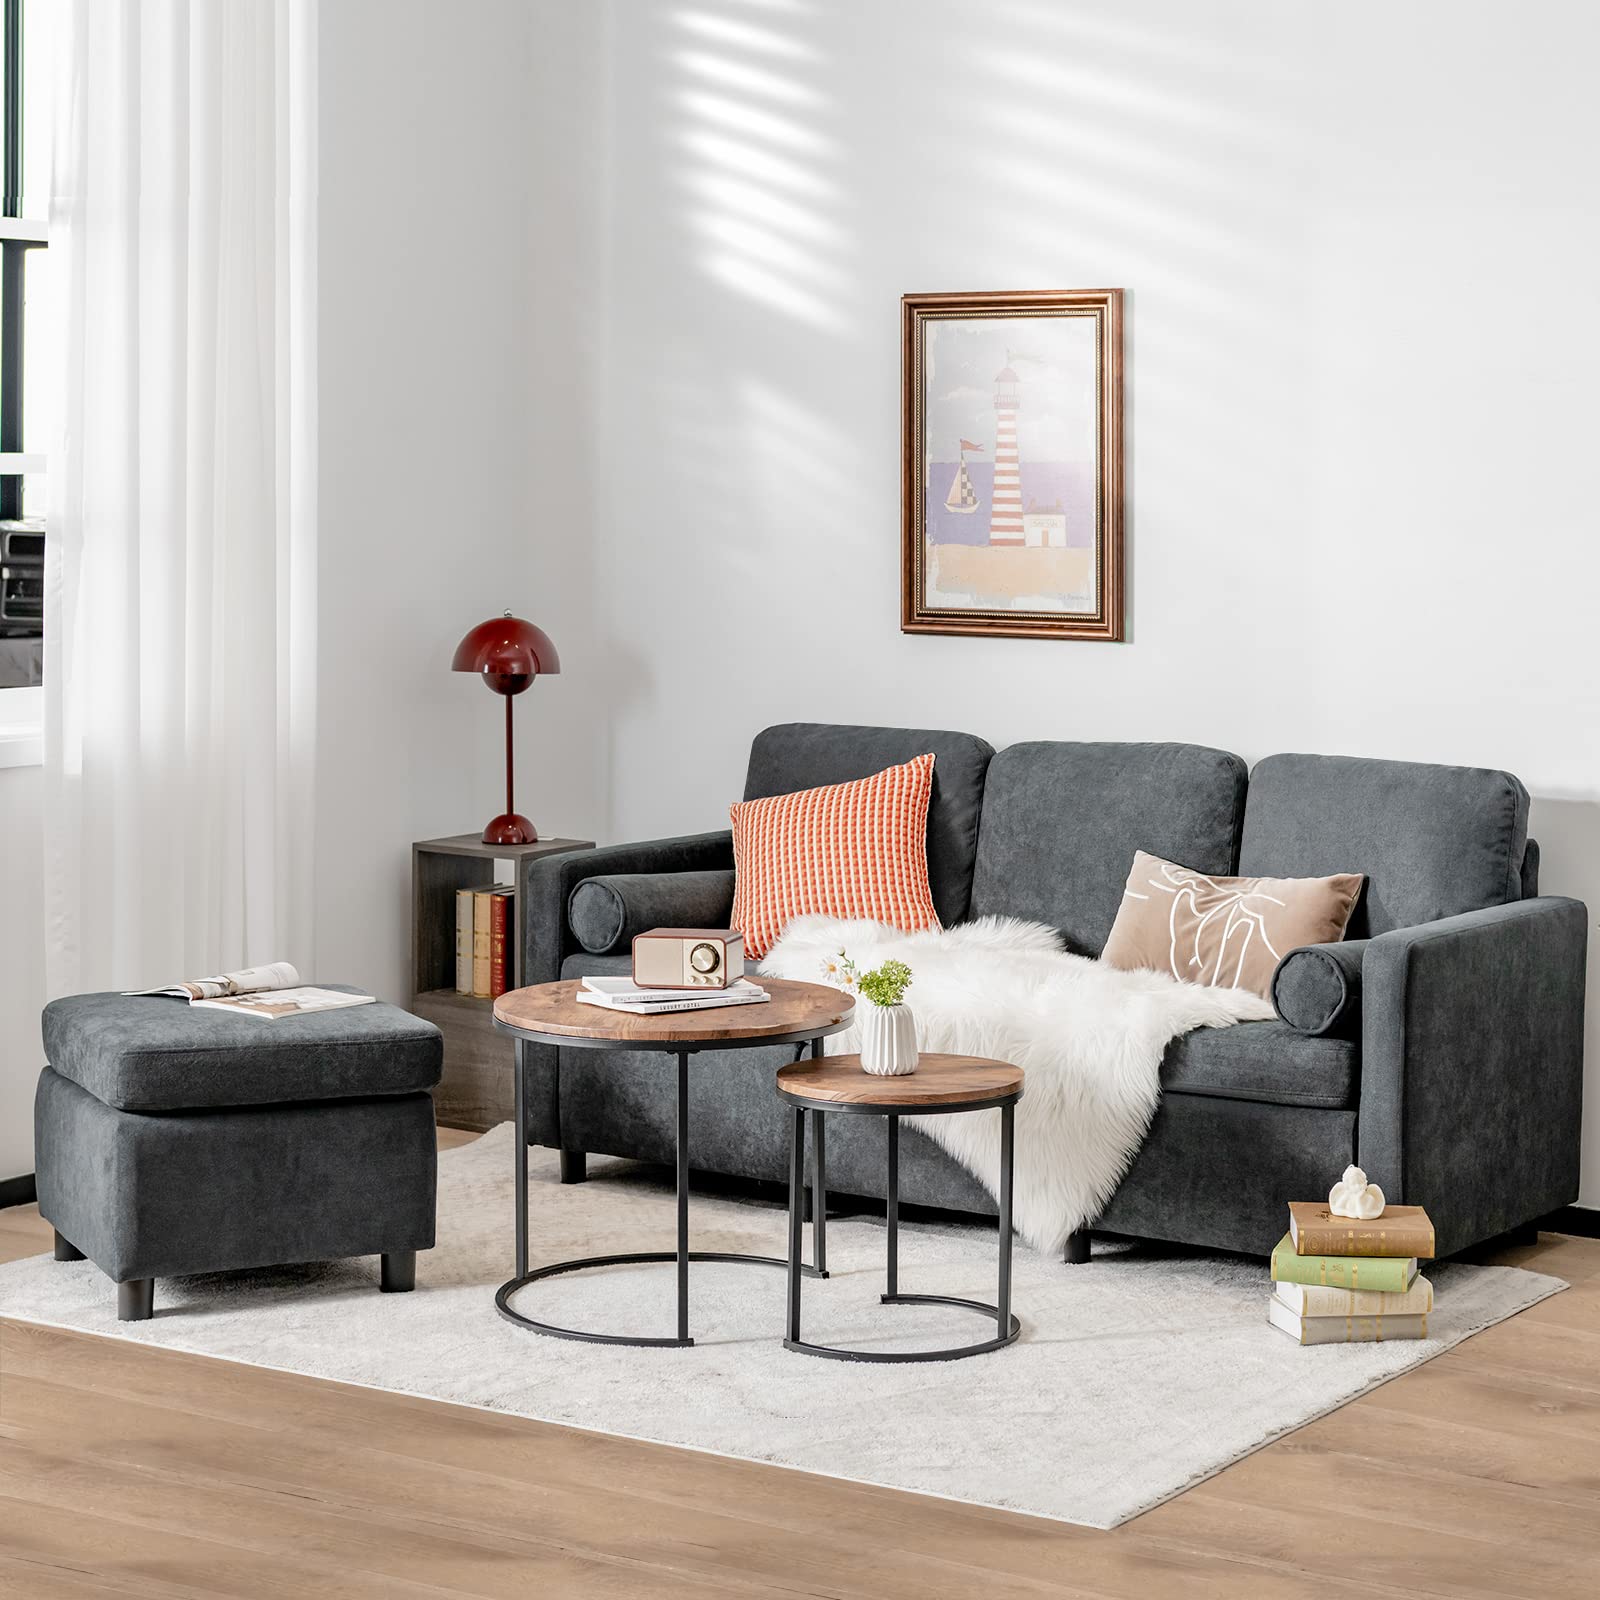 Giantex Sectional Sofa Set, Convertible L-Shaped Couch with Ottoman, 73" x 31.5" x 34" (Grey)